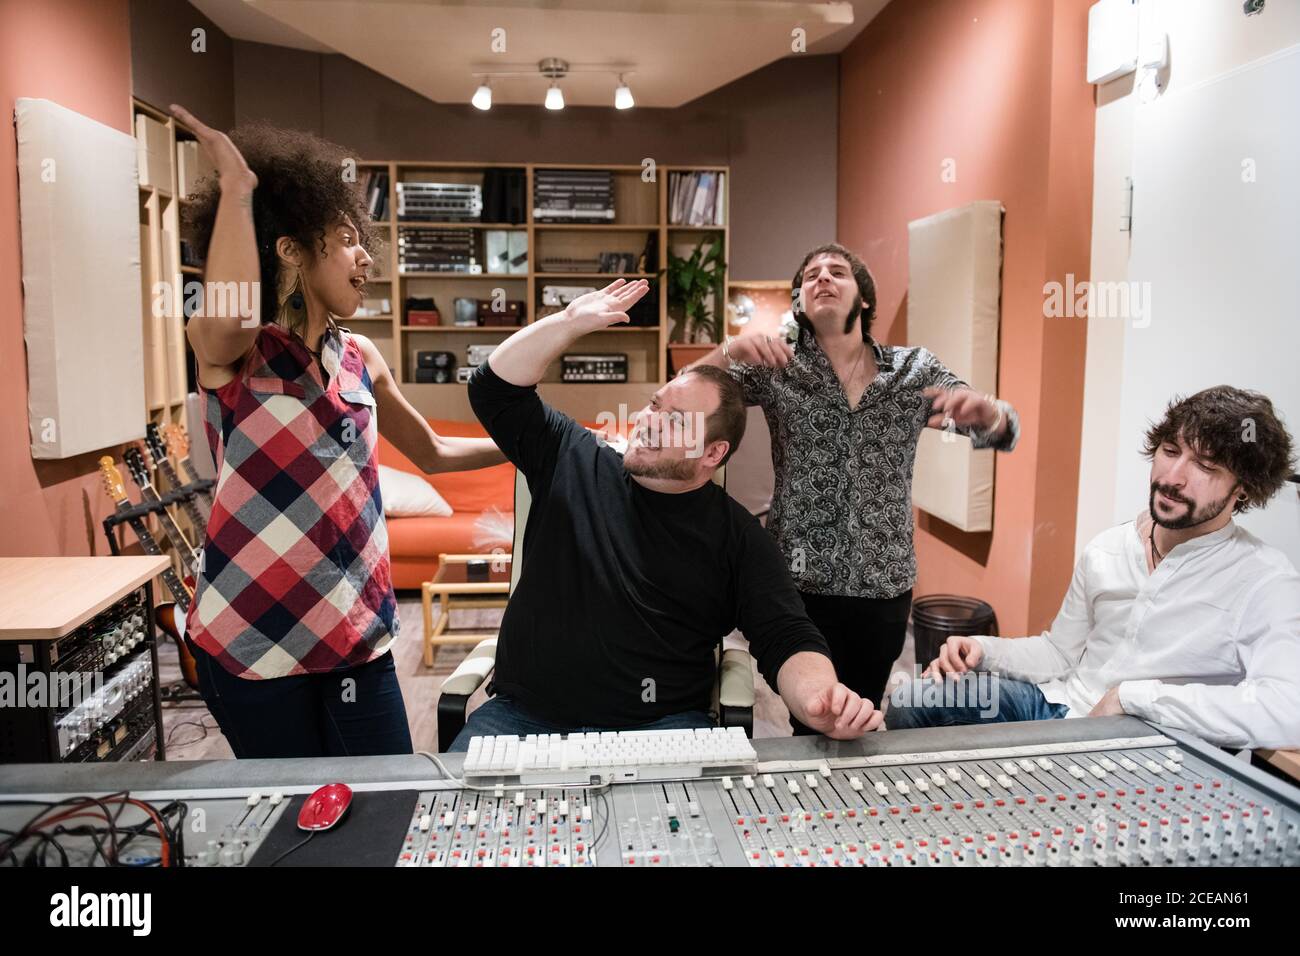 Group of people rejoicing over success and having fun?after recording music in studio Stock Photo